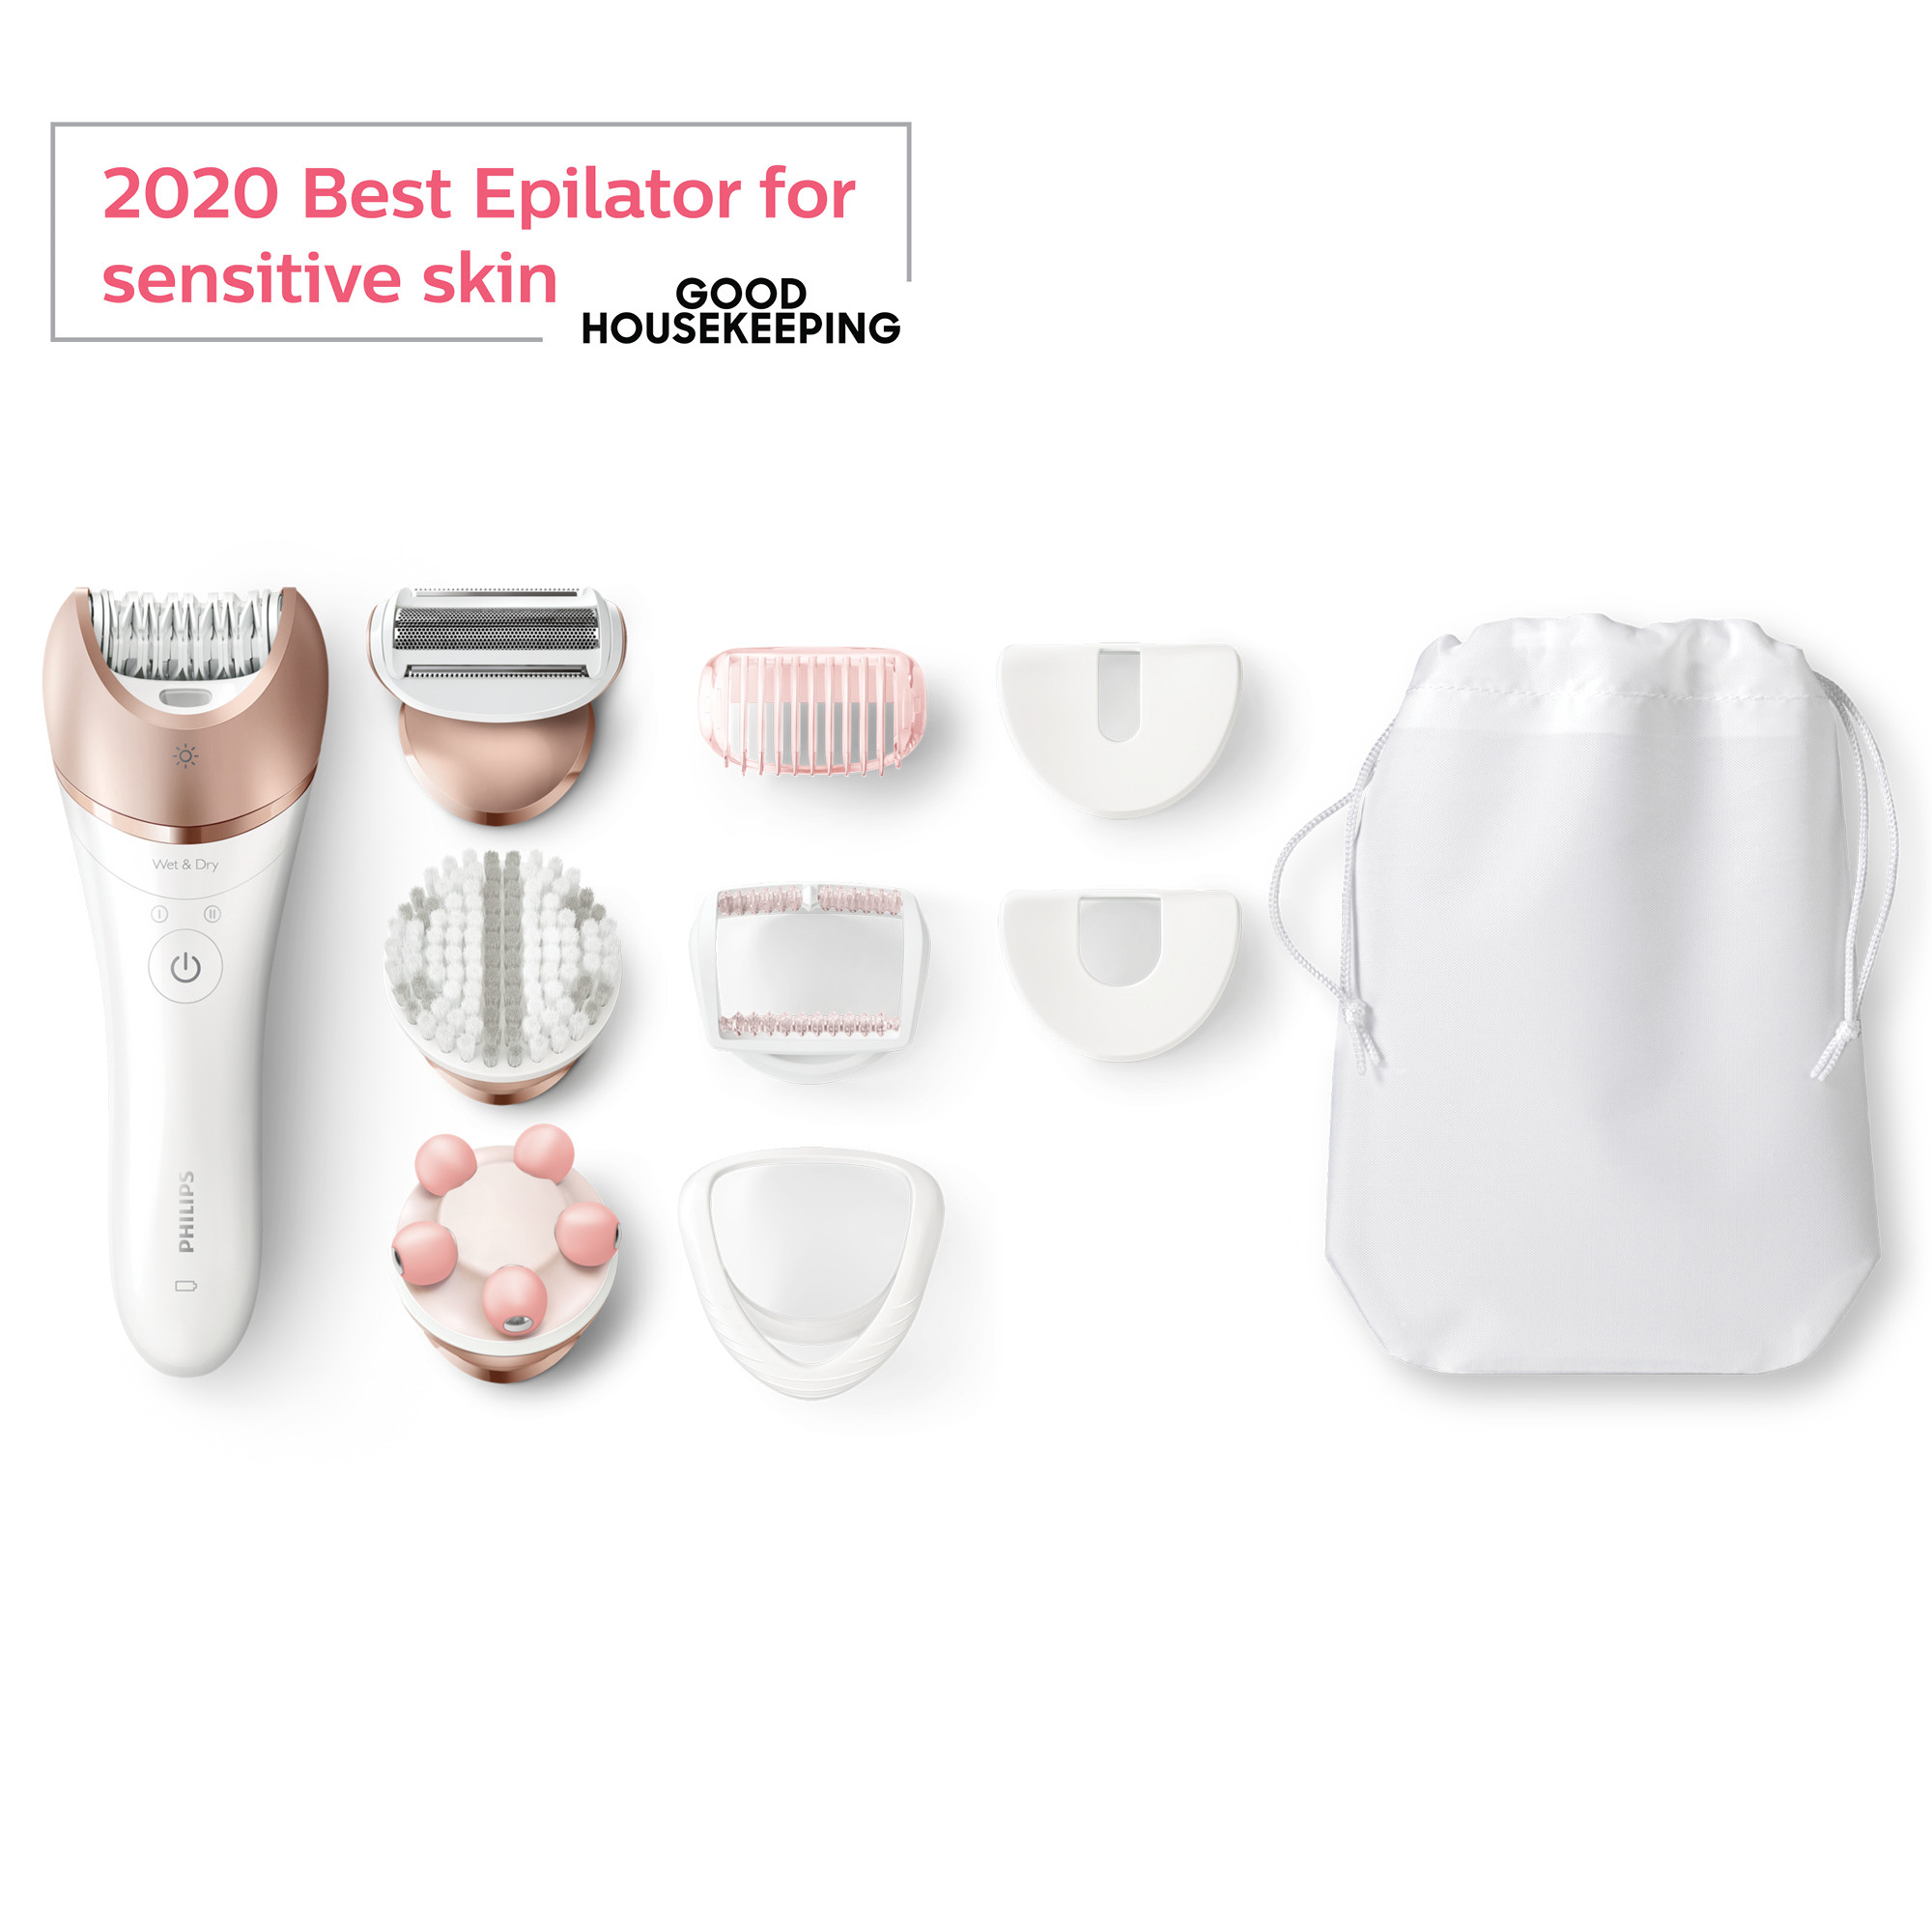 Philips Satinelle Prestige Epilator, Wet & Dry Electric Hair Removal, Body Exfoliation and Massage (Bre648) - image 1 of 14